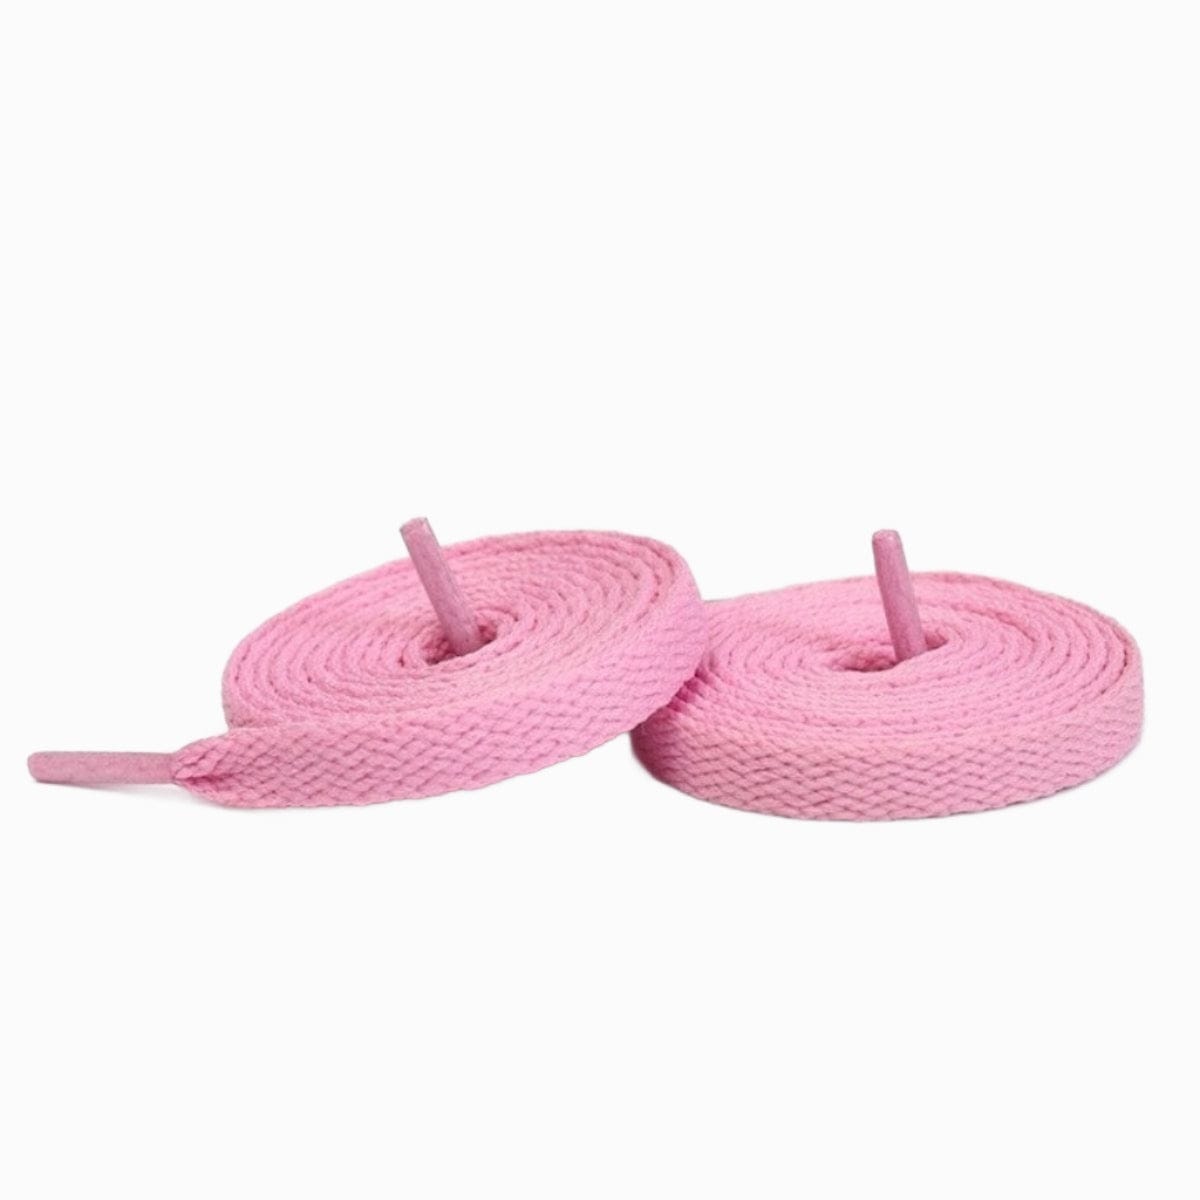 Pink Replacement Adidas Shoe Laces for Adidas Handball Spezial Sneakers by Kicks Shoelaces